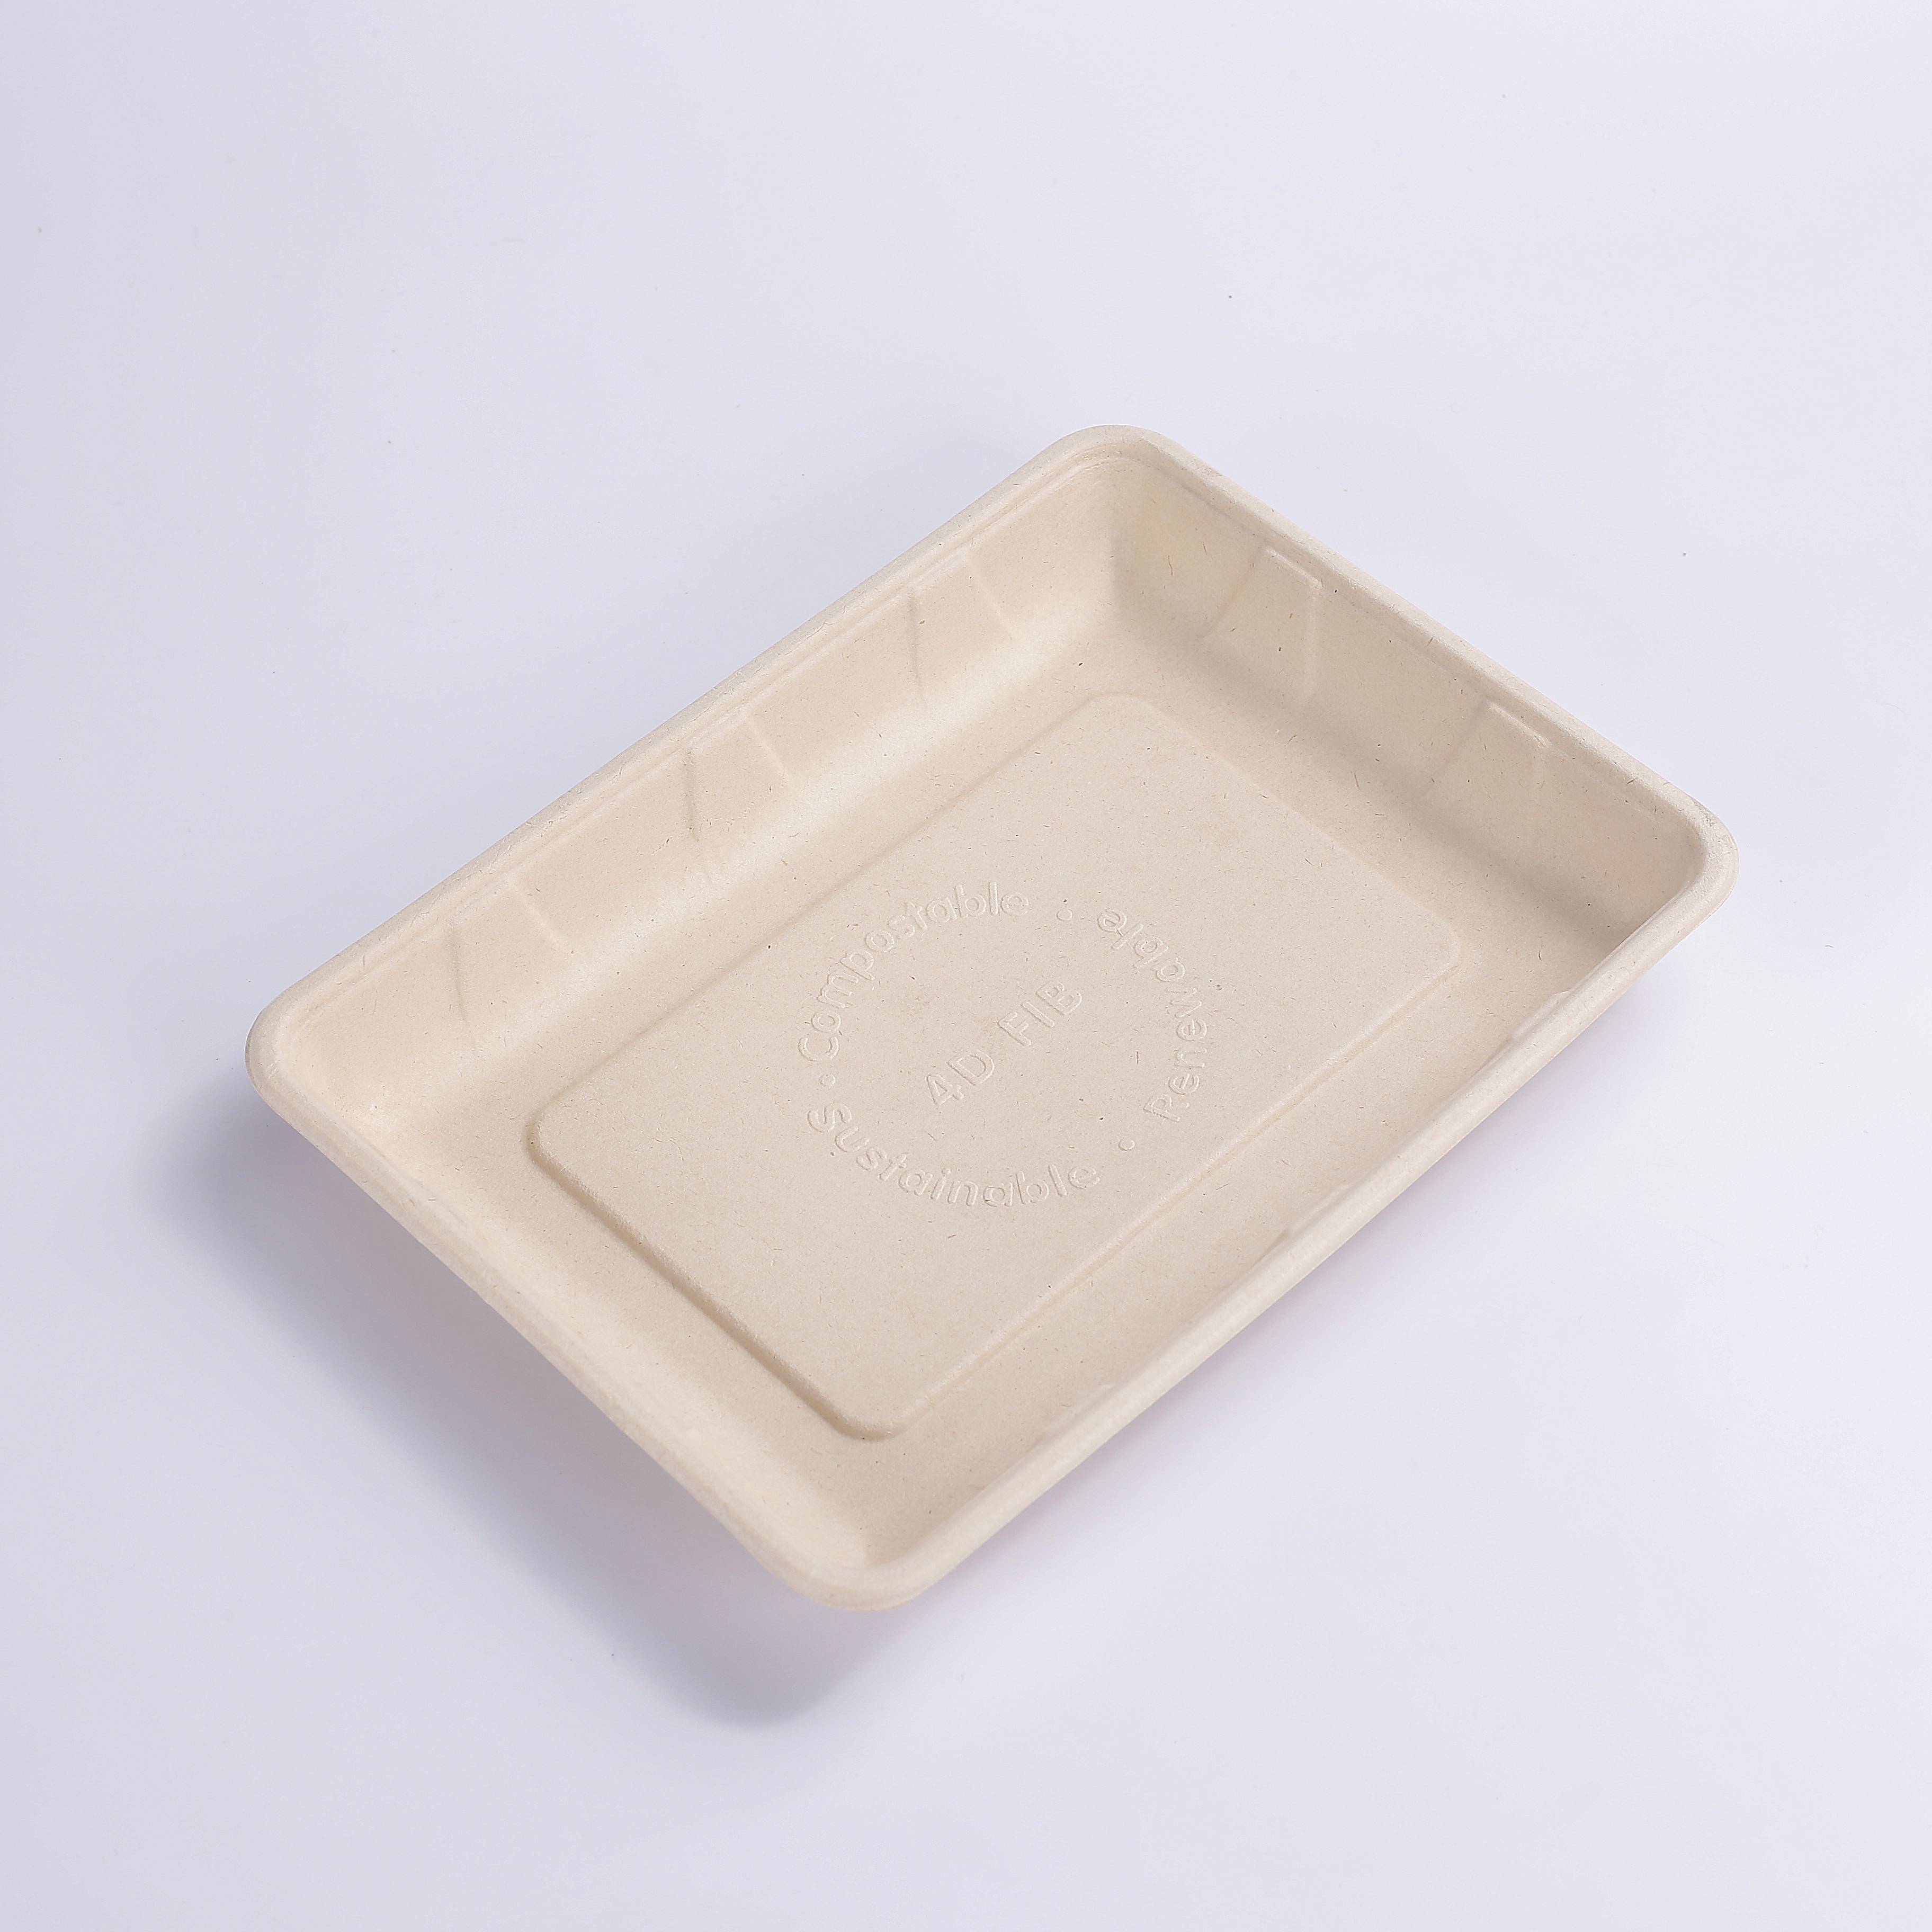 Best Price for Biodegradable Egg Trays - 9.5*7 INCH Compostable Heavy-Duty Disposable Food BBQ Fruit Tray, Microwave Paper Plates Waterproof and Oil-Proof Heavy Duty Trays, 100% Biodegradable Rect...